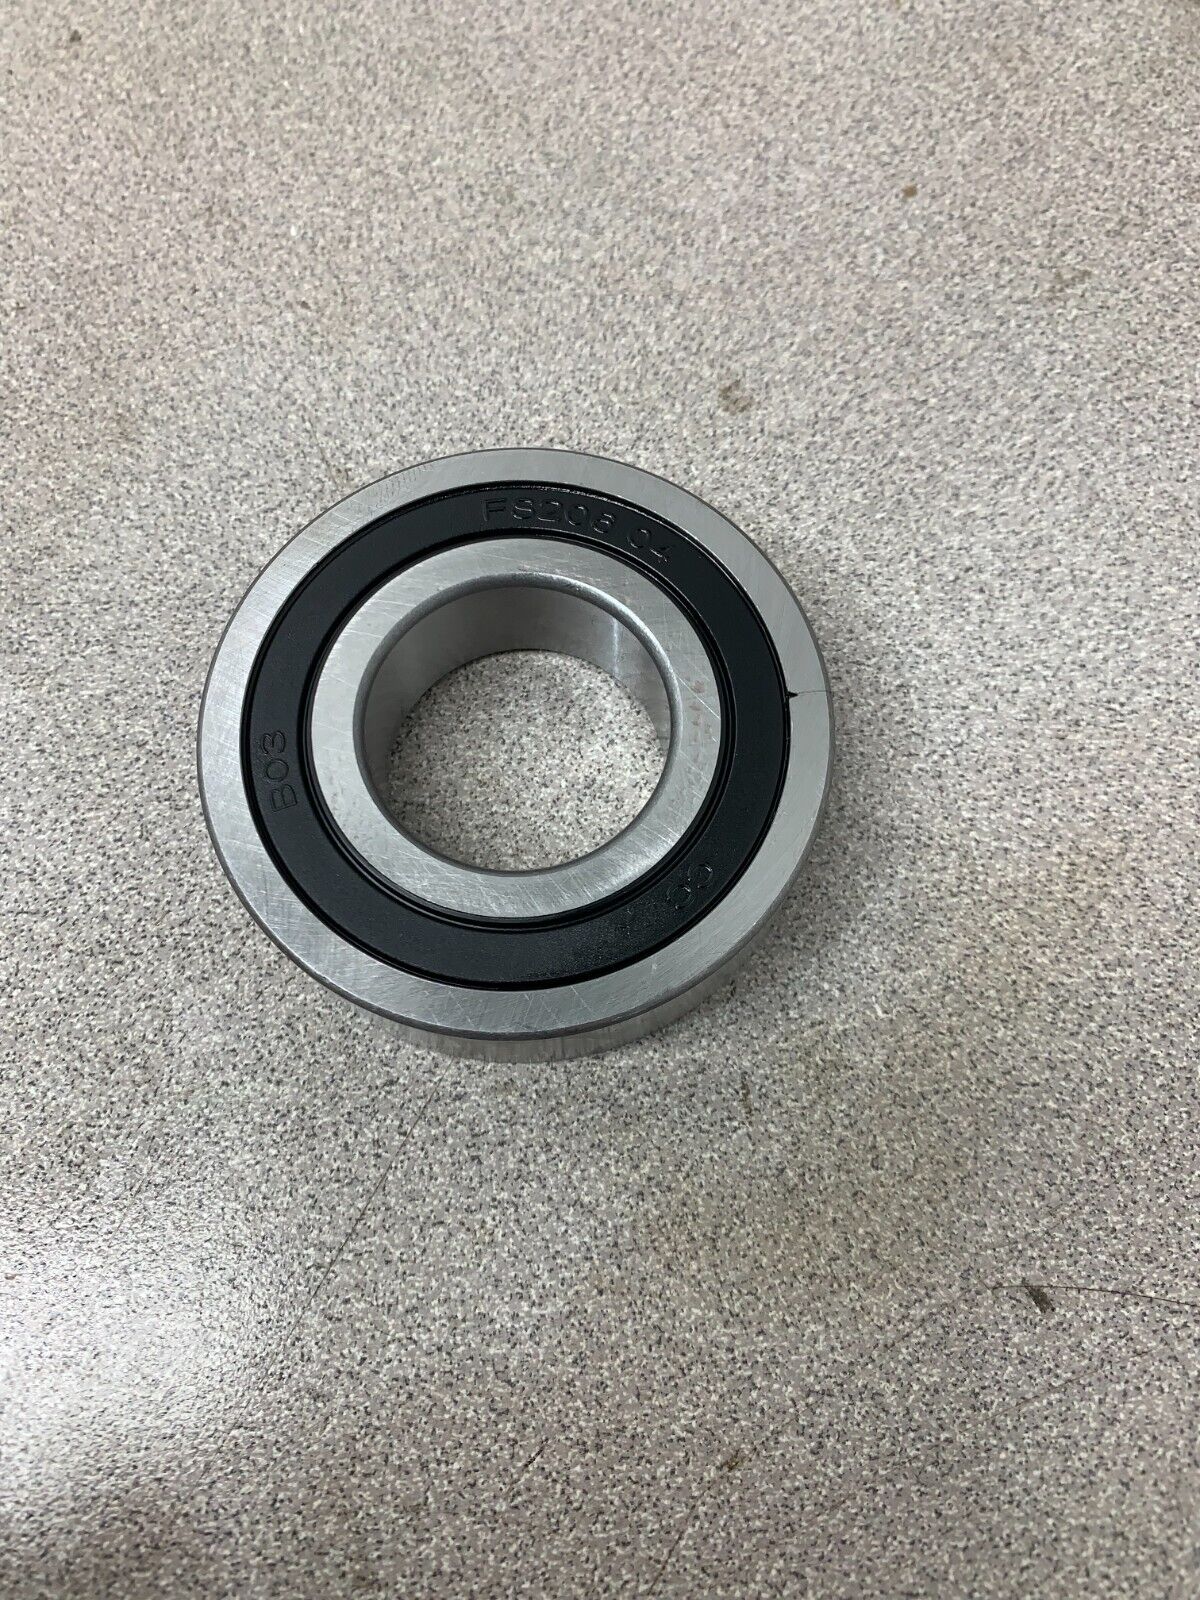 NEW CCTY FS20604 ROLLER BEARING MGV 206 2RS